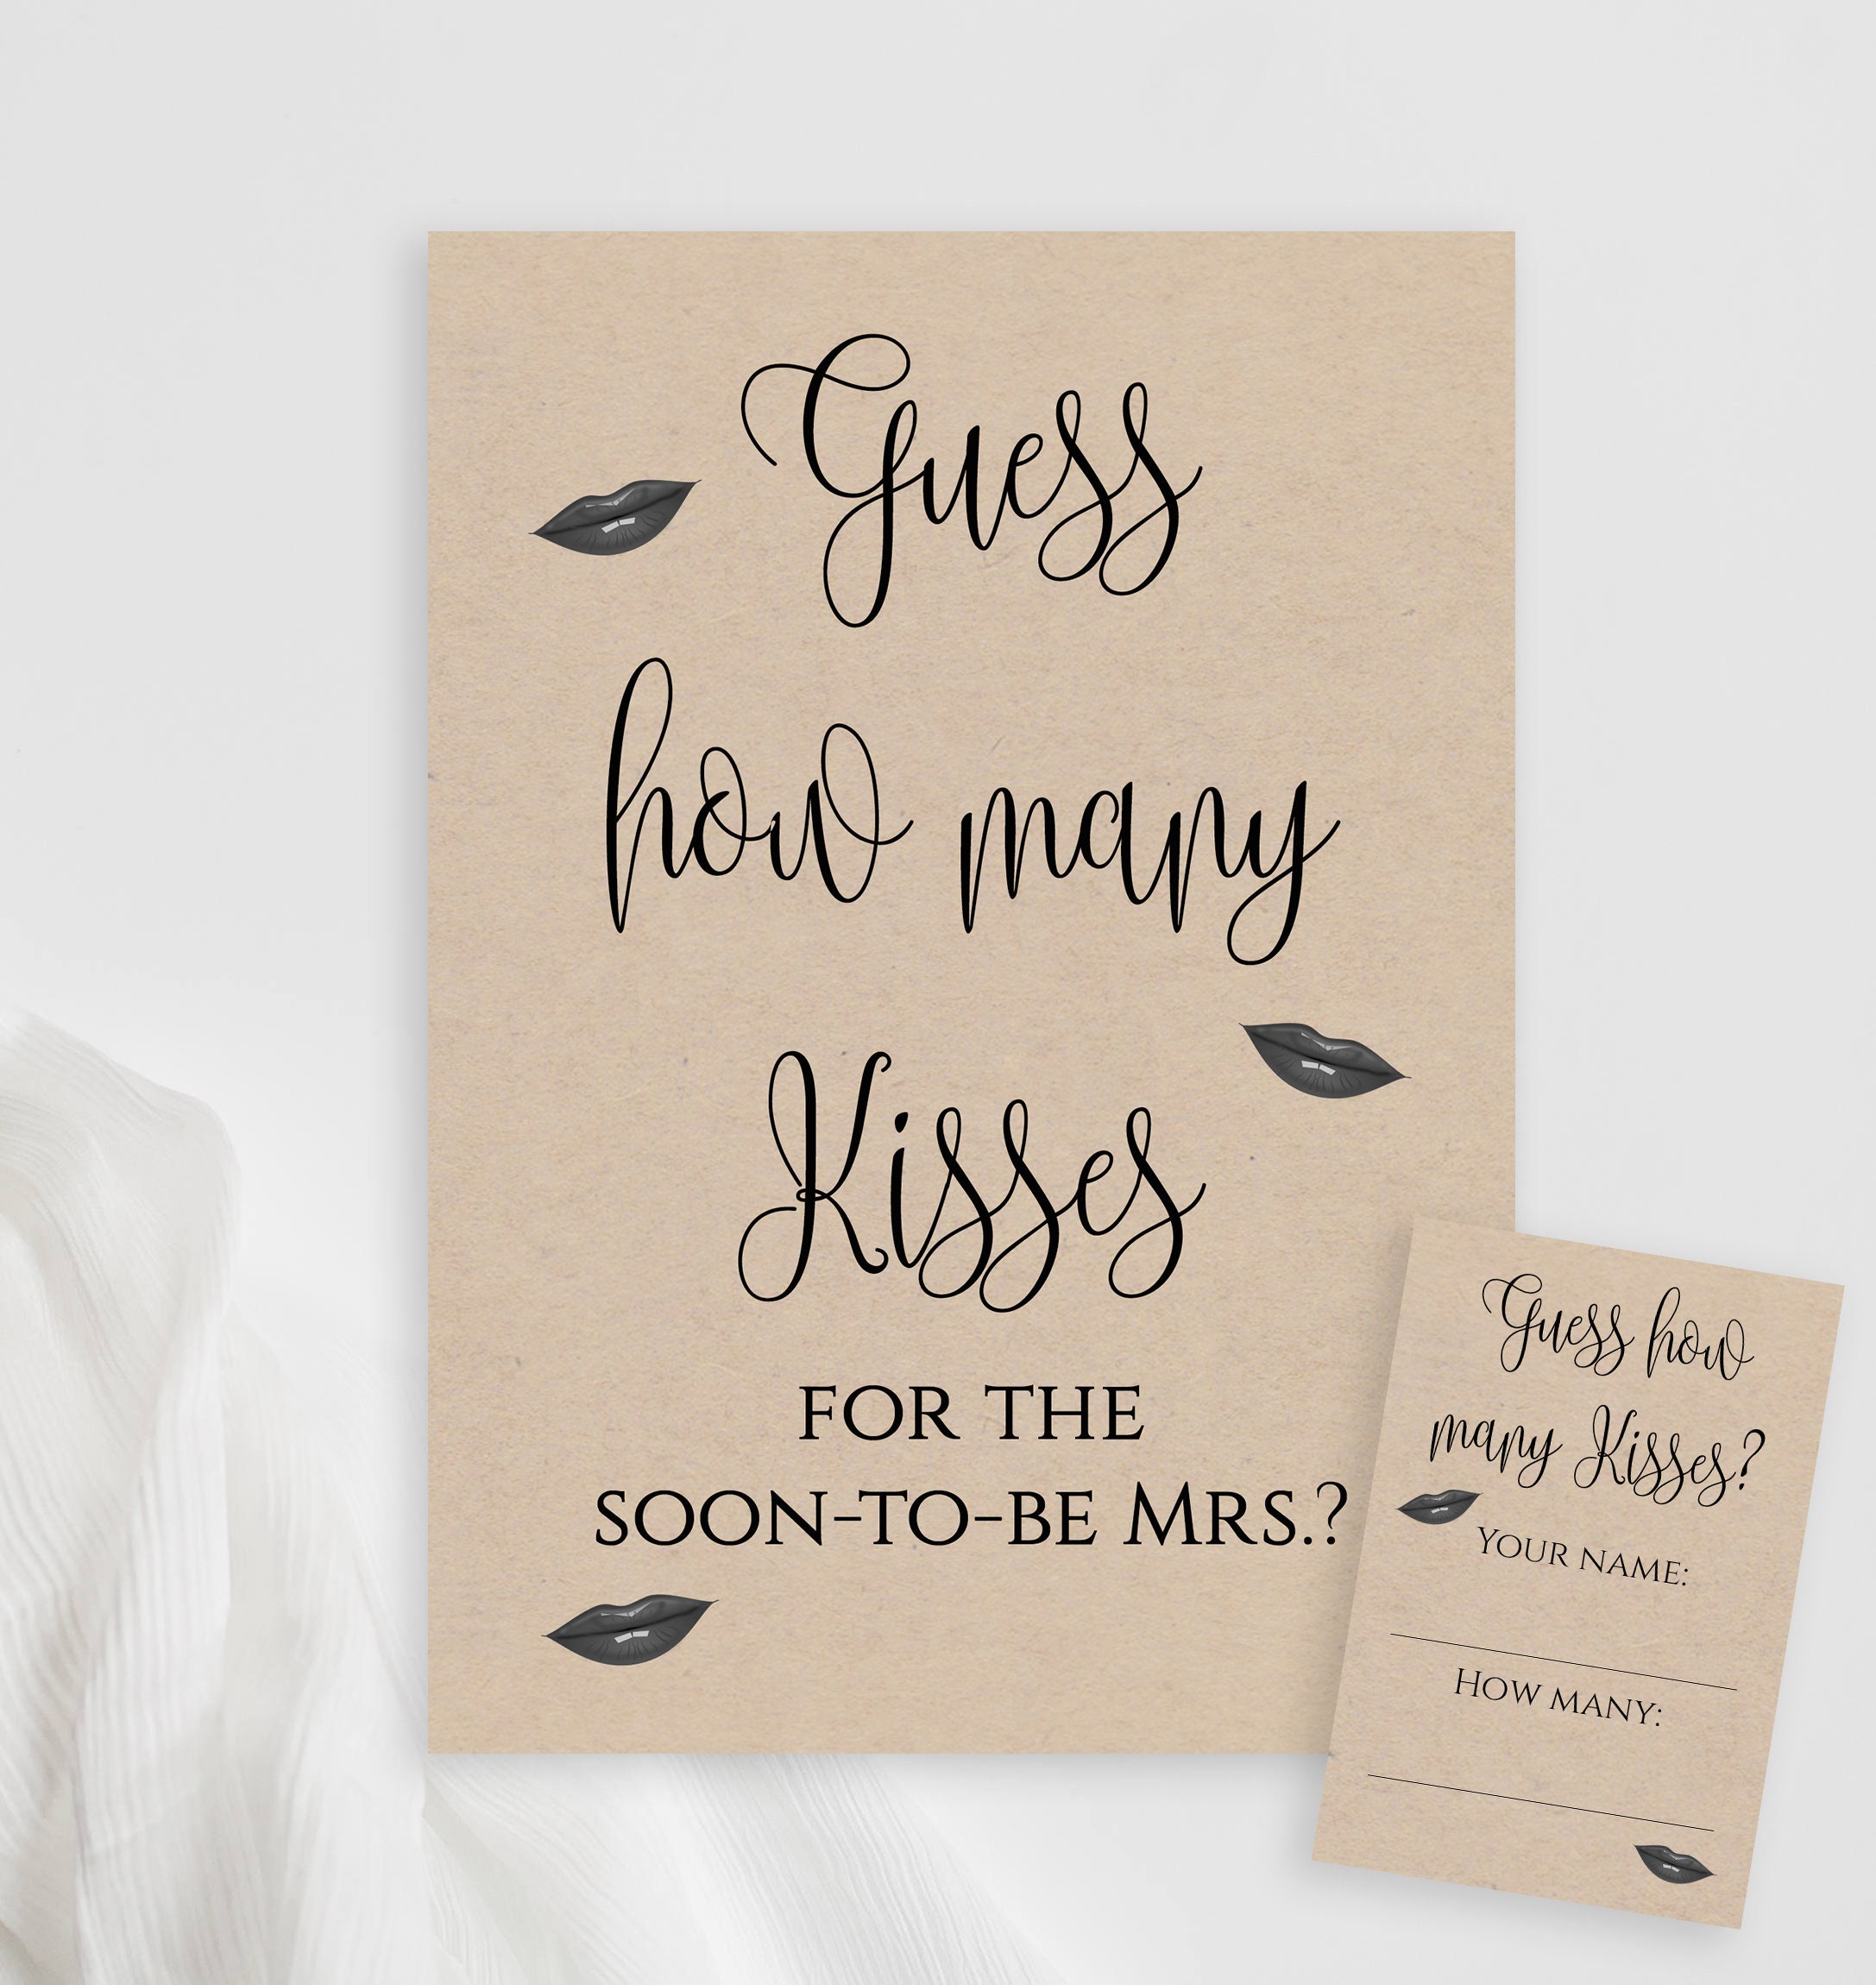 Guess how many kisses for the soon to be mrs printable game Etsy